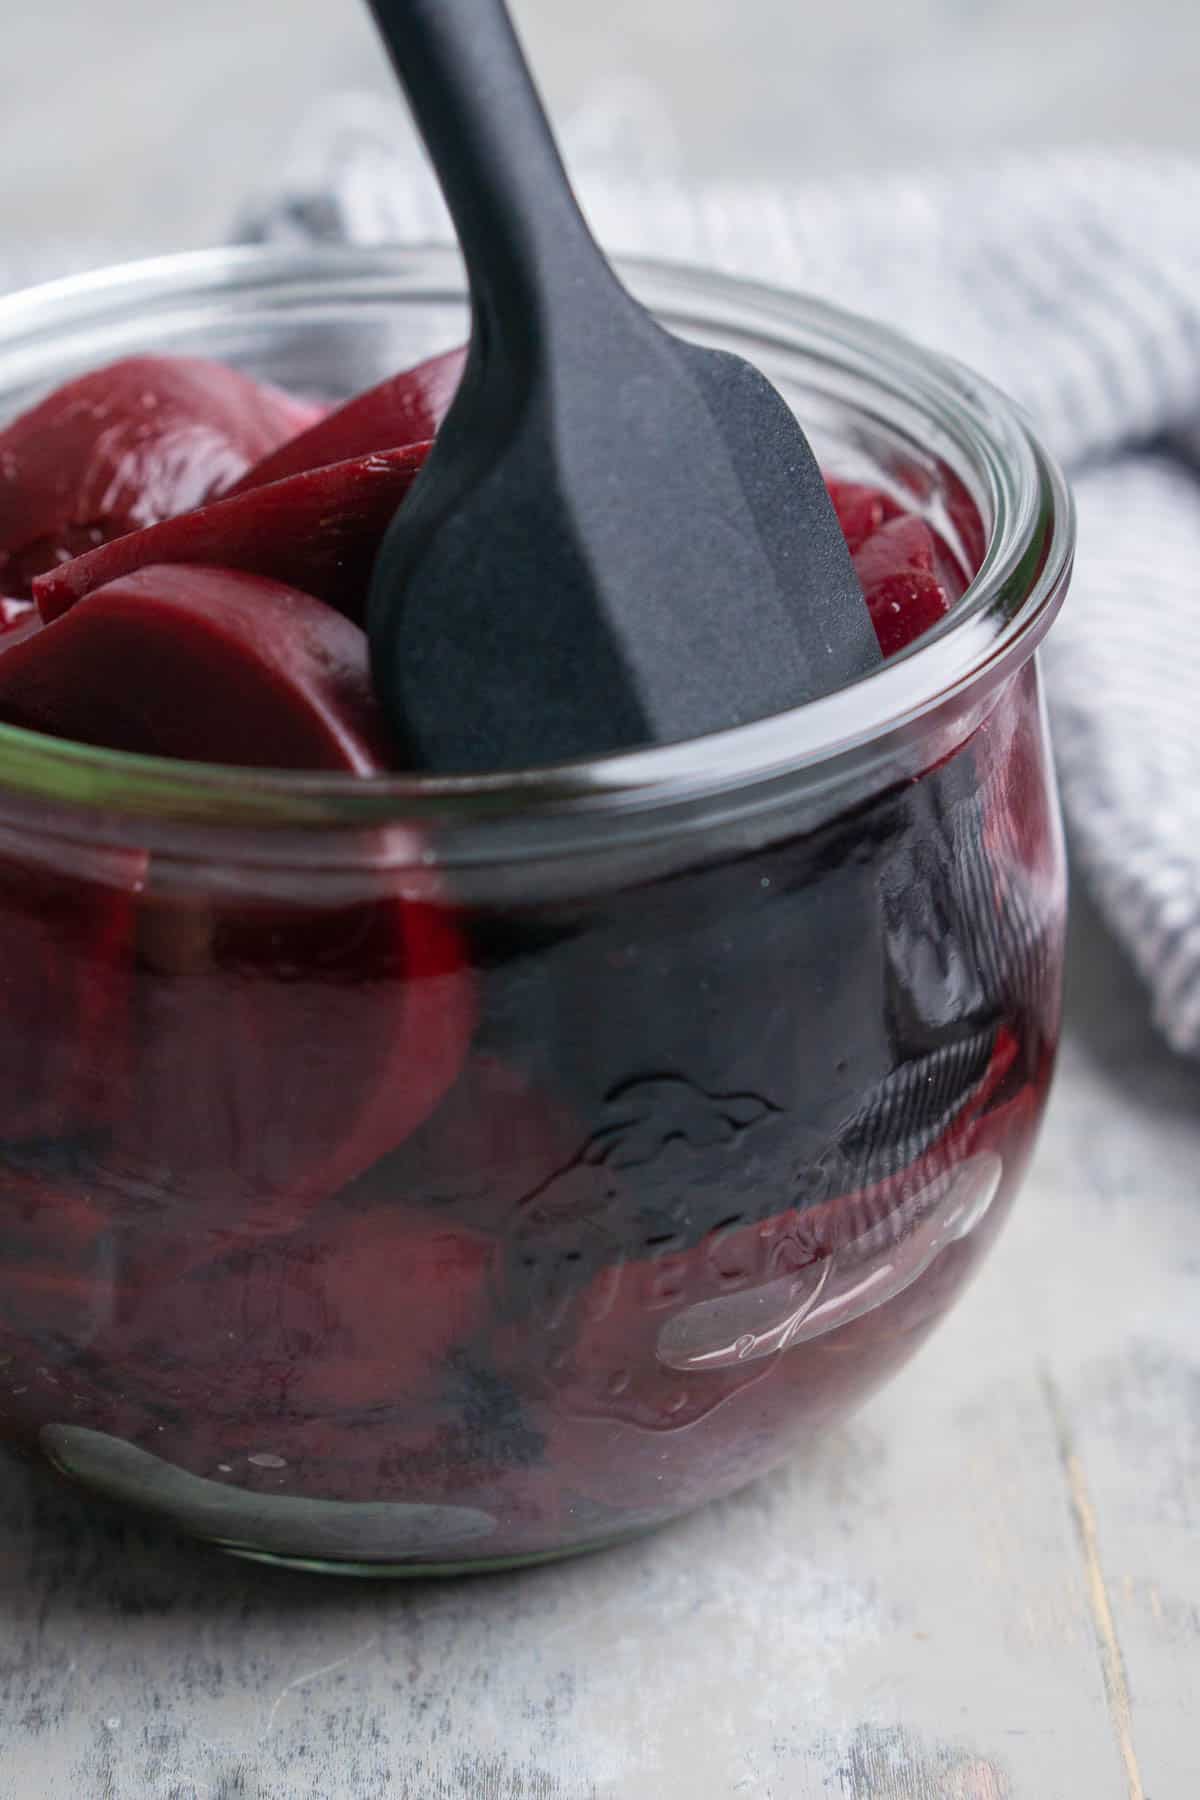 black silicone patula removes air bubbles from pickle beets in glass jar